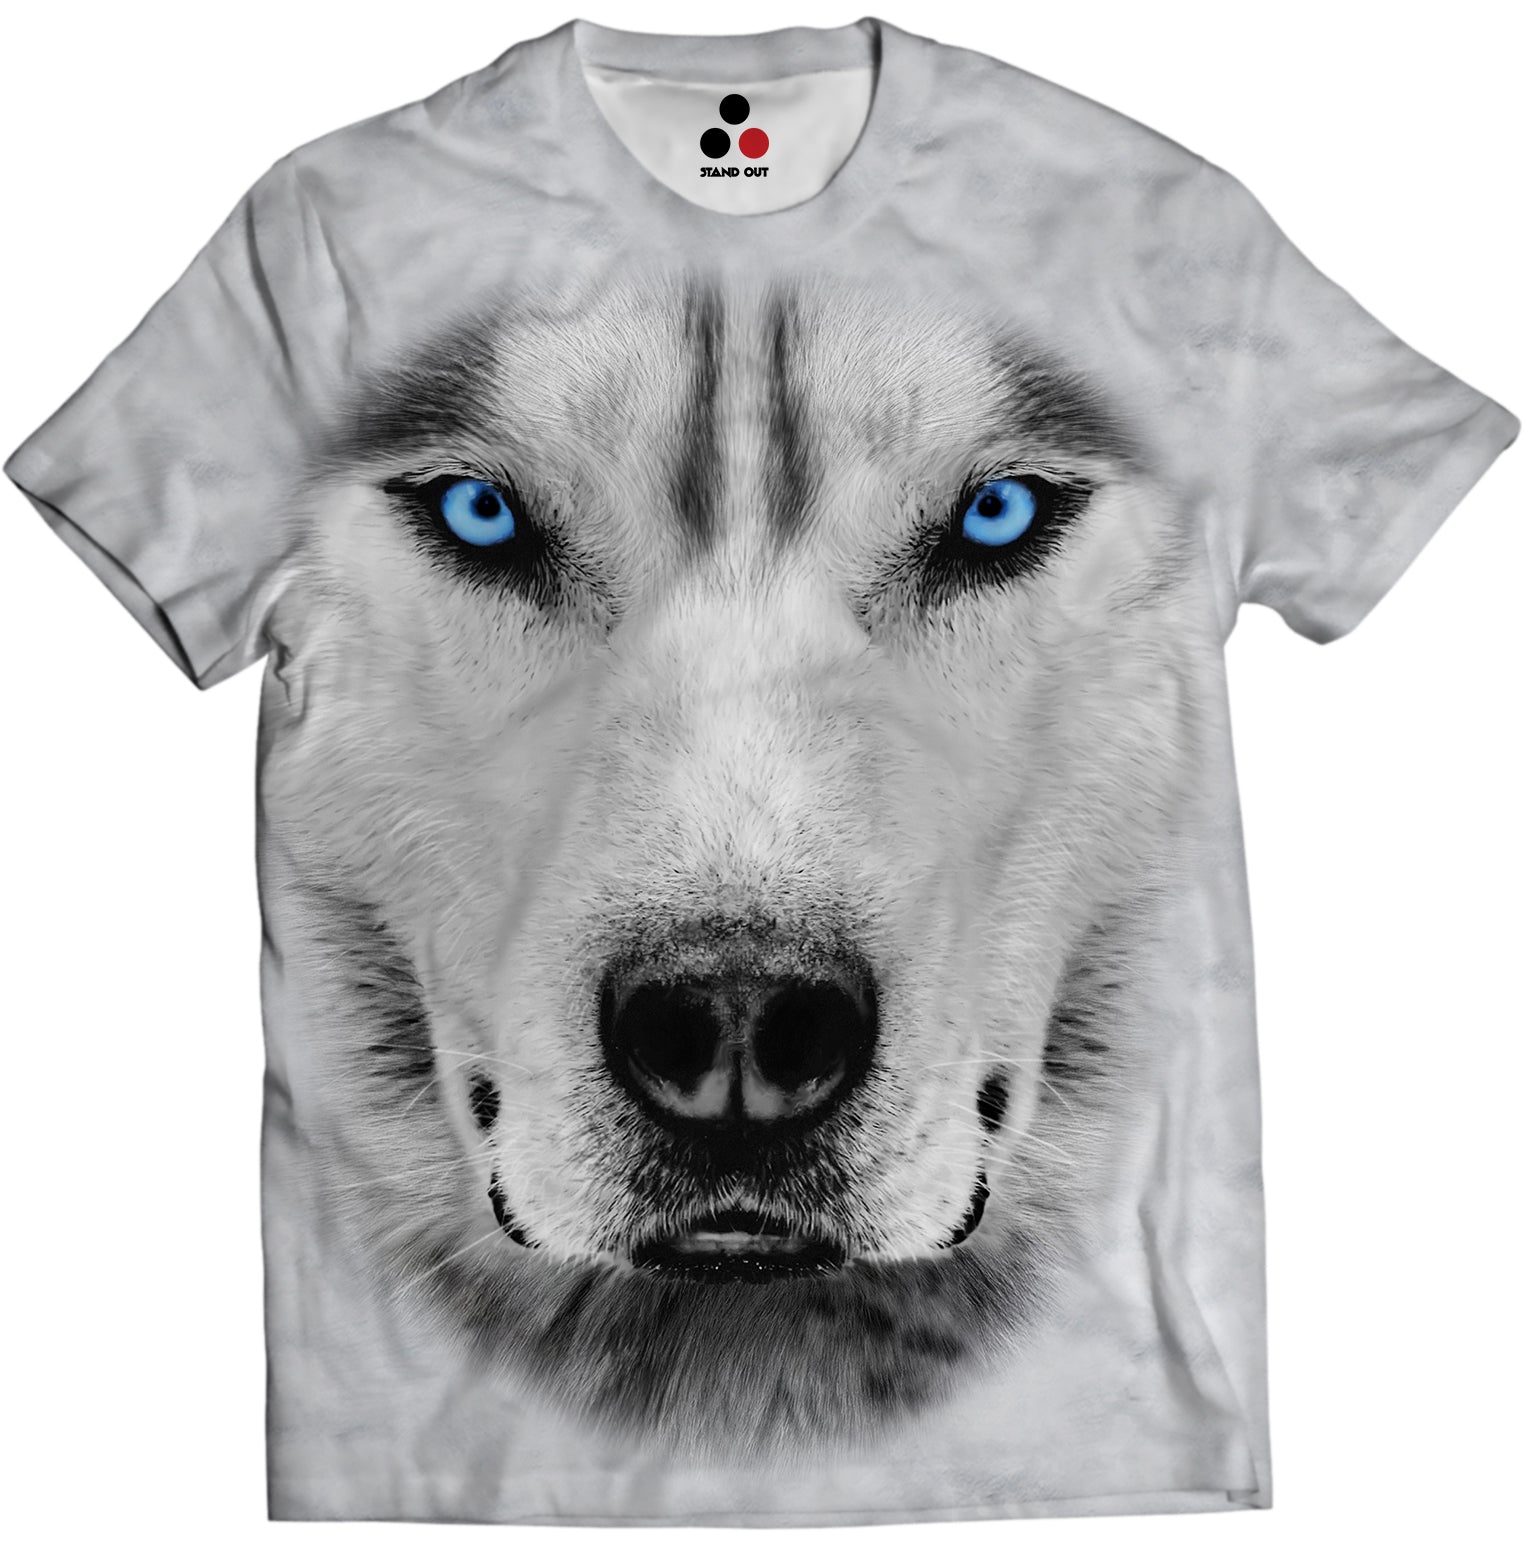 standout husky t shirt all over print dog face t shirt the call of the wild husky t shirt dog show in india the kennel club of india dog t shirts for humans funny dog shirts dog graphic t-shirts dogteeshop dog lover t shirt dog clothes online dog print t shirts India pet lover t shirt 3d animal print t shirts pet supply the mountain t shirt husky t shirt